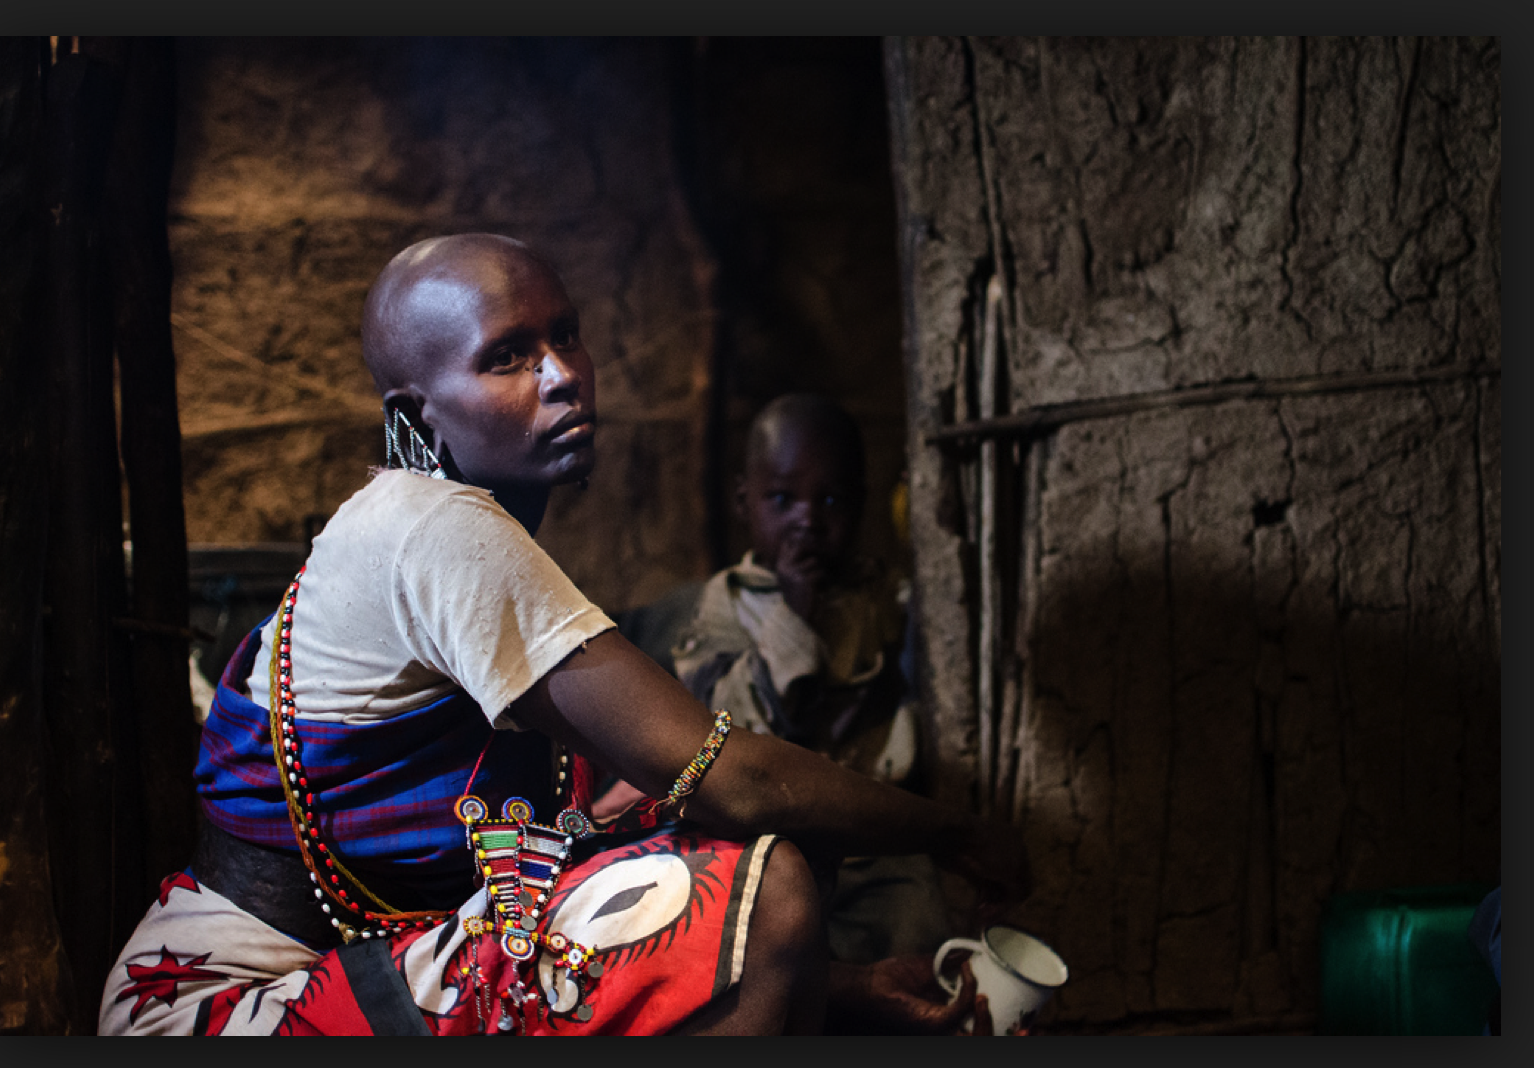 This Mother's Day, give a gift to help a struggling Maasai widow and her children